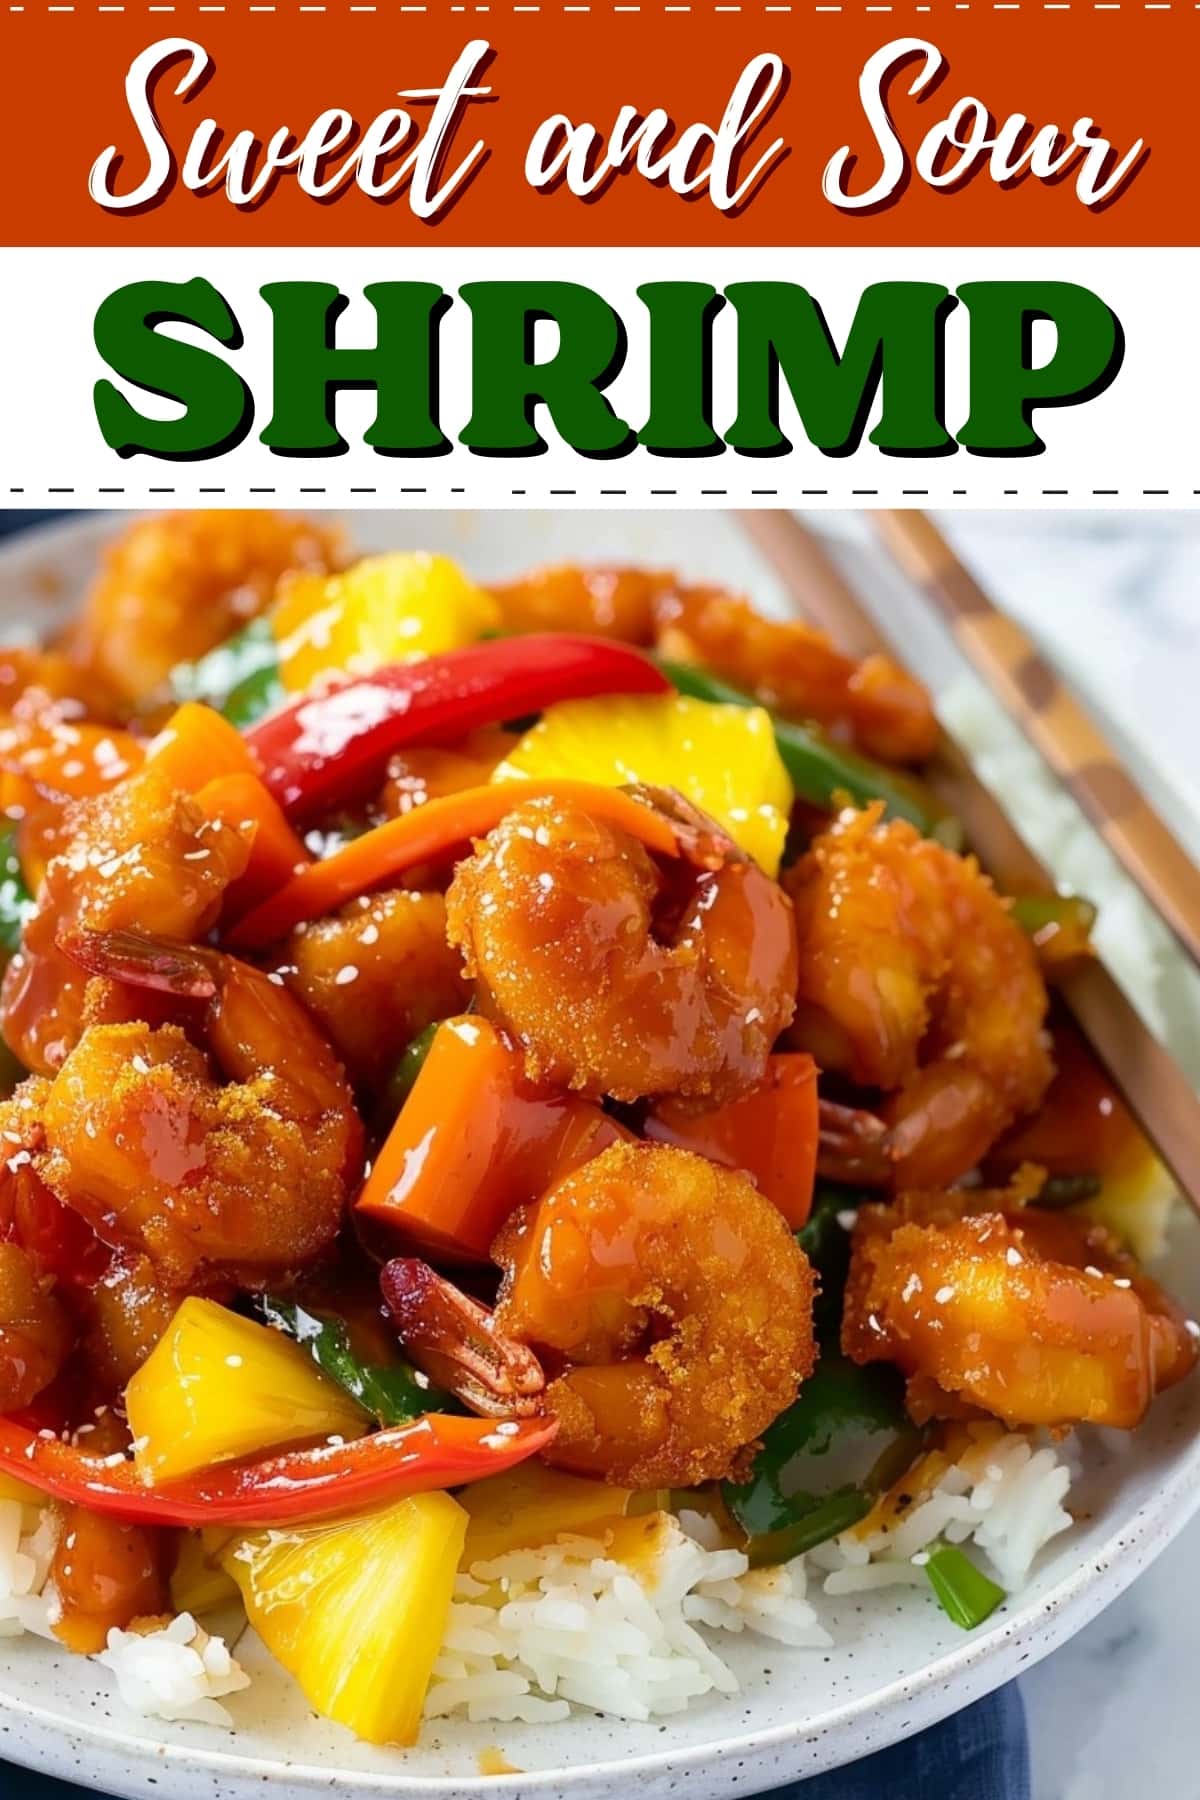 Sweet and sour shrimp.